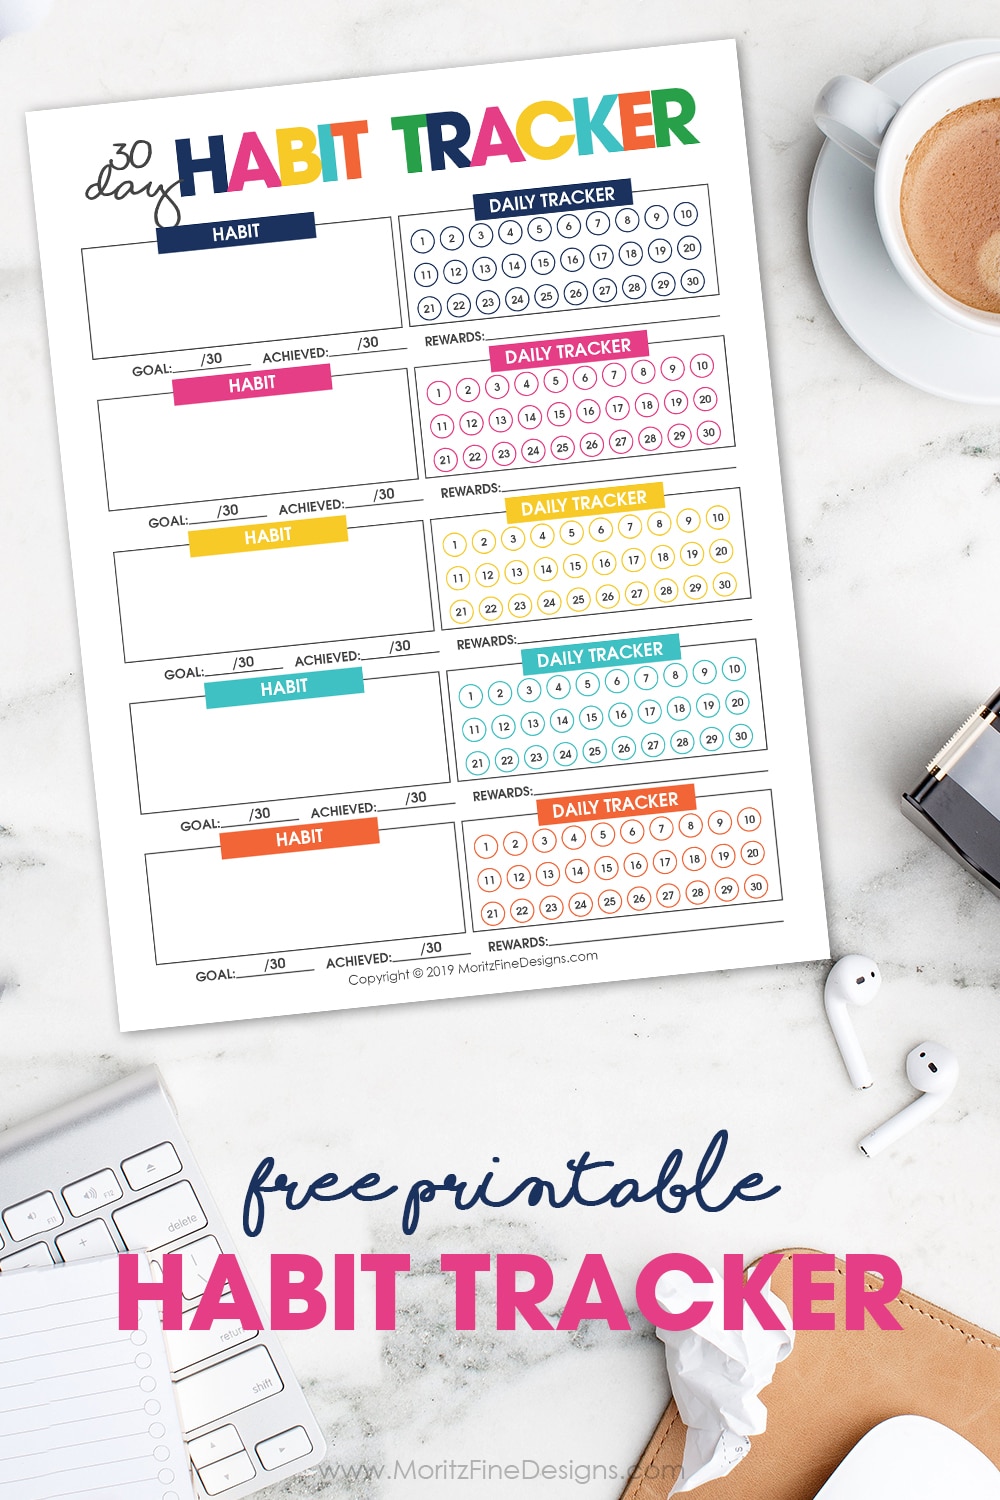 Trying something new? Make it a habit in no time at all by tracking your progress daily, weekly and monthly with the free printable Habit Tracker.